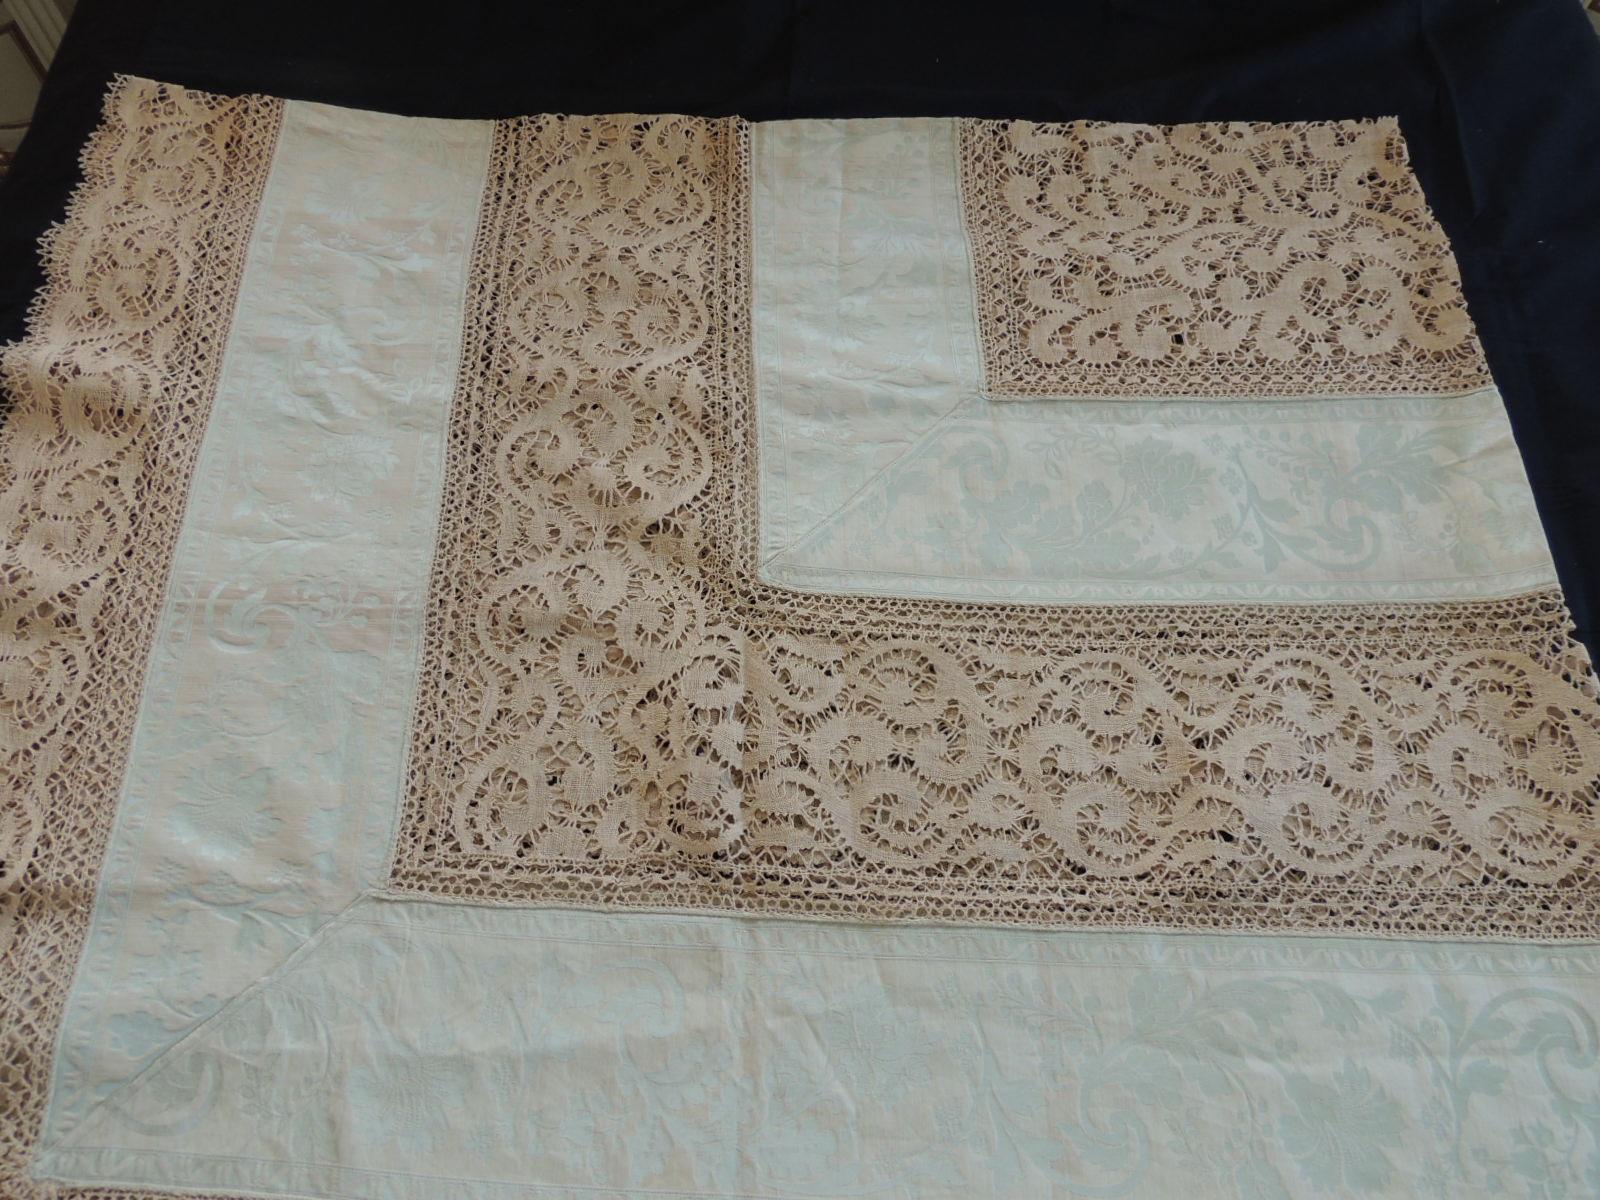 Italian Bobbin Lace and Damask Bed Topper with Large Lace Center Panel